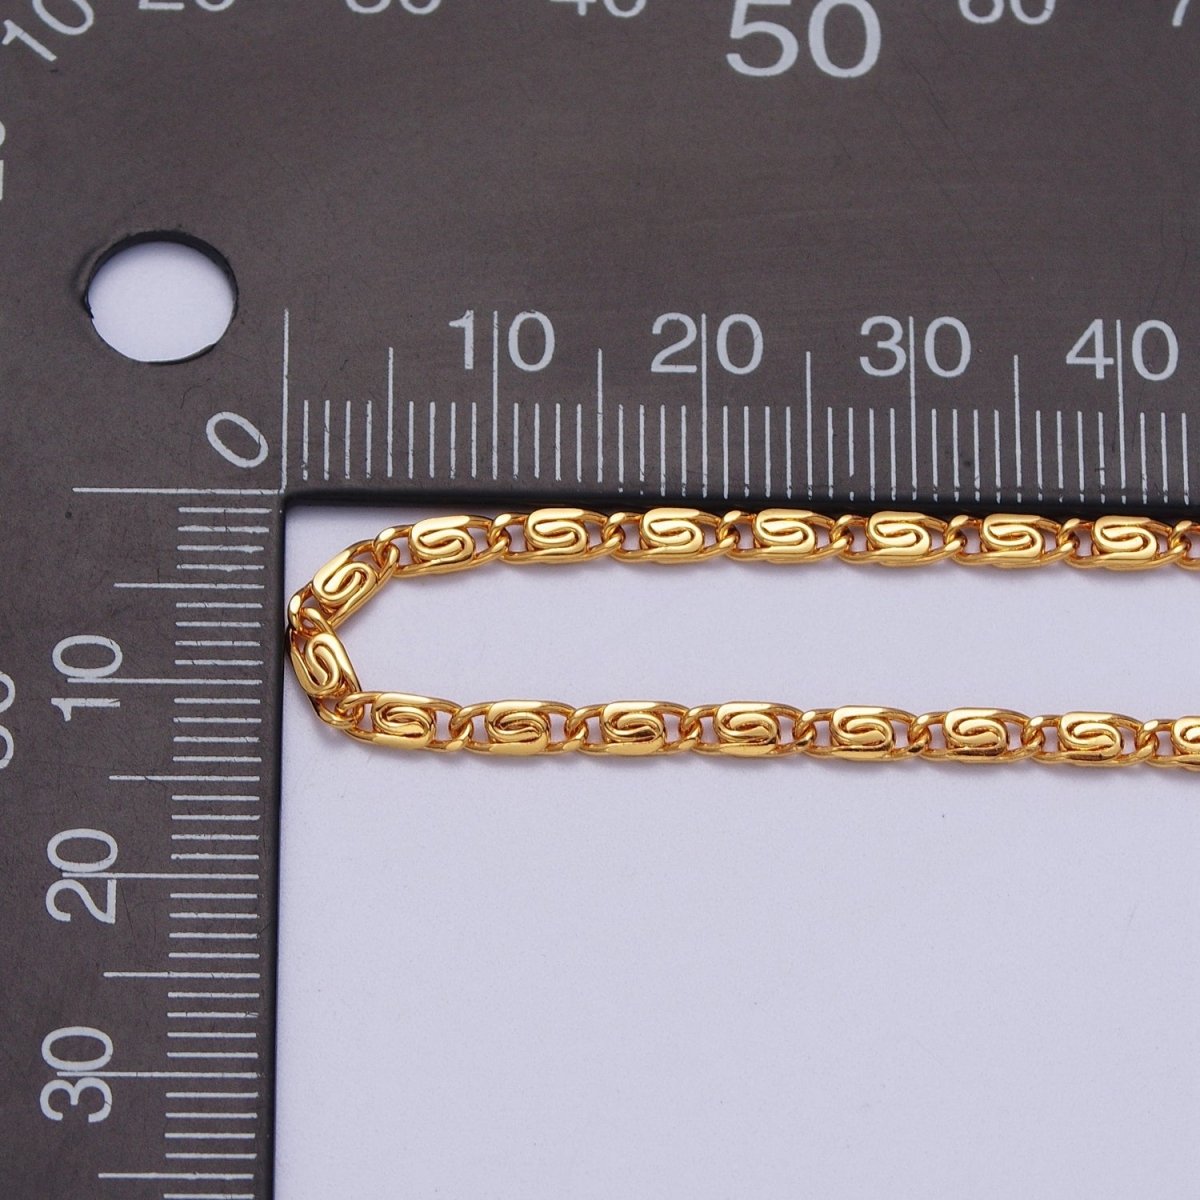 24K Gold Filled 2.5mm Snail Scroll Chain 17.5, 18.5, 19 Inches Necklace in Gold & Silver | WA-1265 - WA-1270 Clearance Pricing - DLUXCA